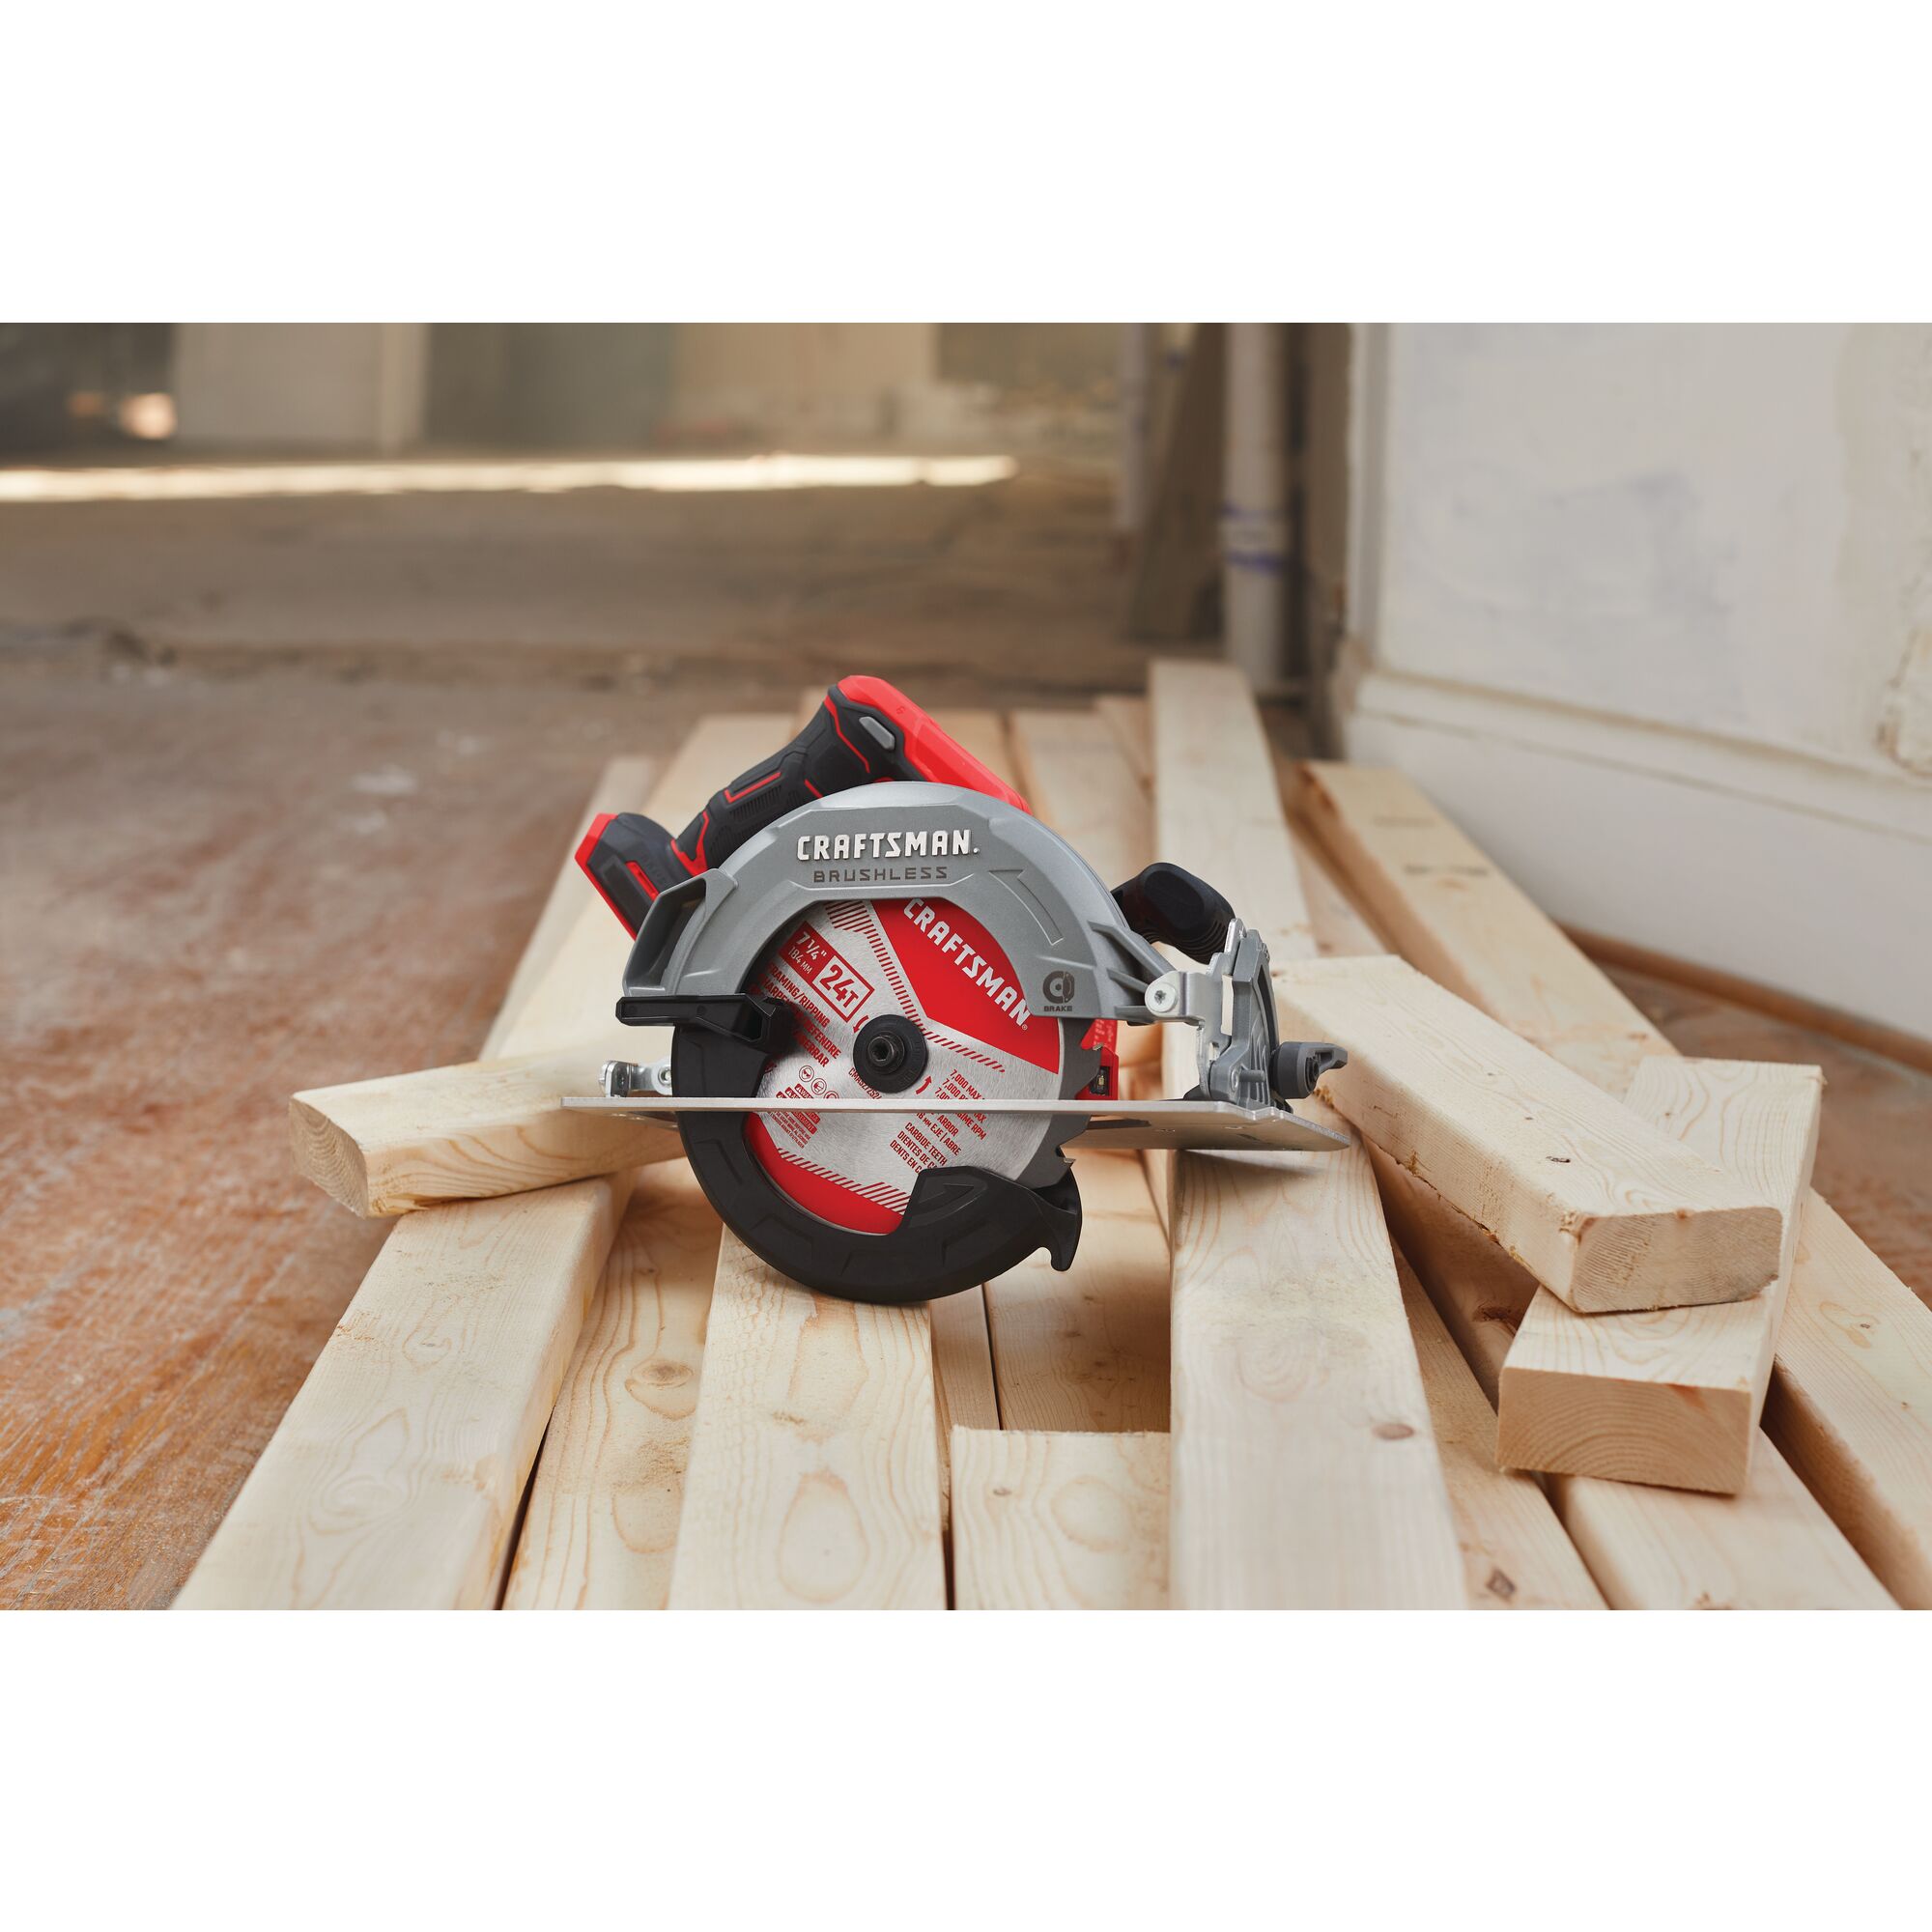 20 volt 7 1 quarter inch brushless cordless circular saw without battery placed on wooden planks.